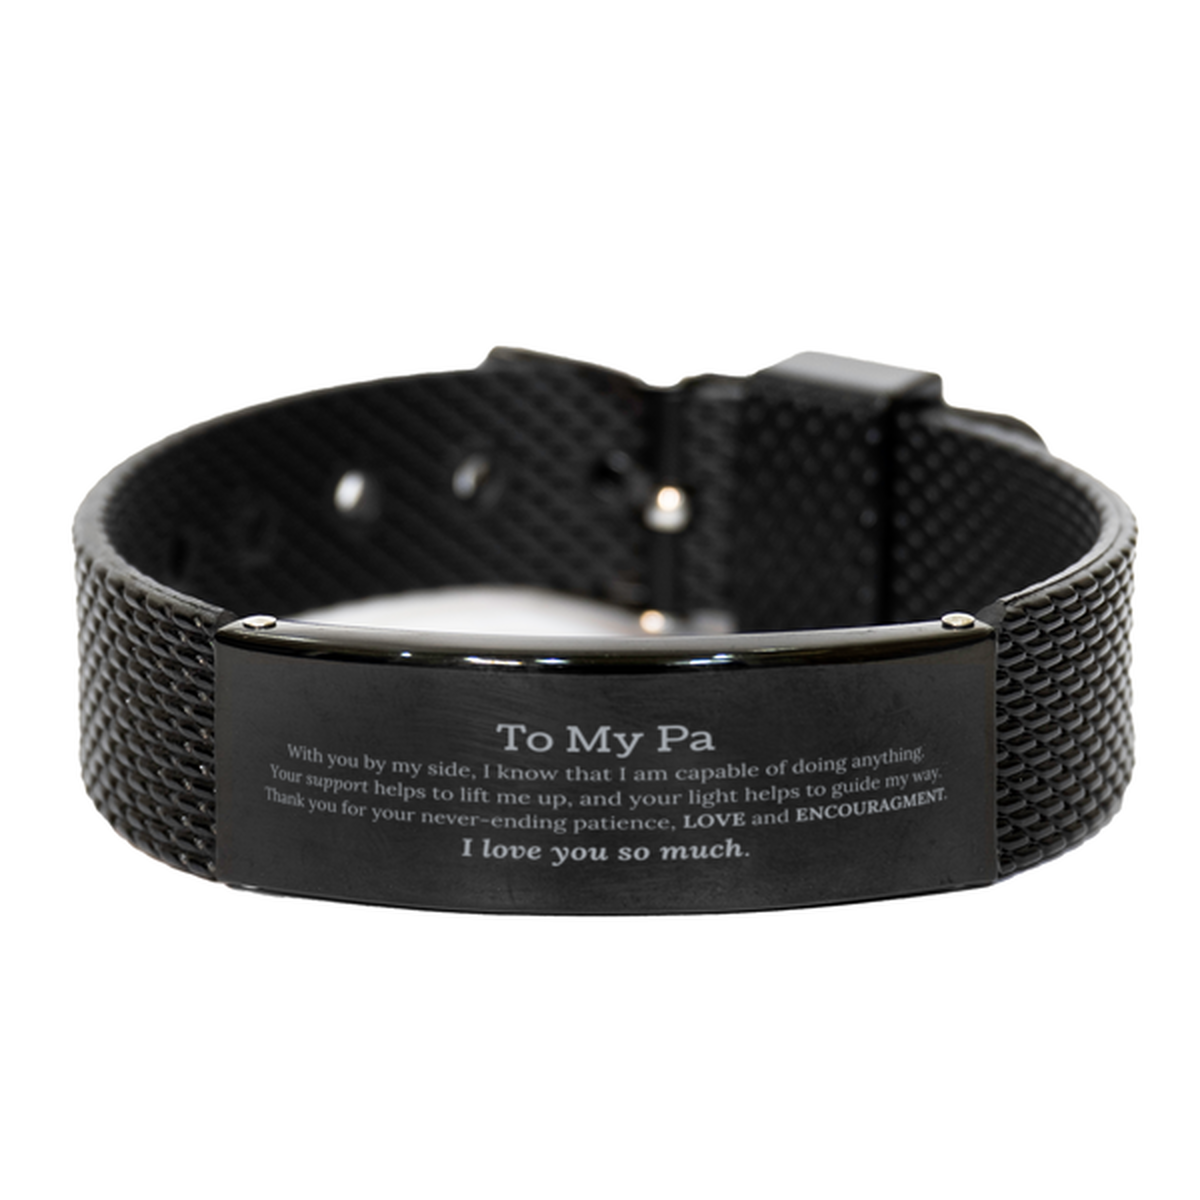 Appreciation Pa Black Shark Mesh Bracelet Gifts, To My Pa Birthday Christmas Wedding Keepsake Gifts for Pa With you by my side, I know that I am capable of doing anything. I love you so much